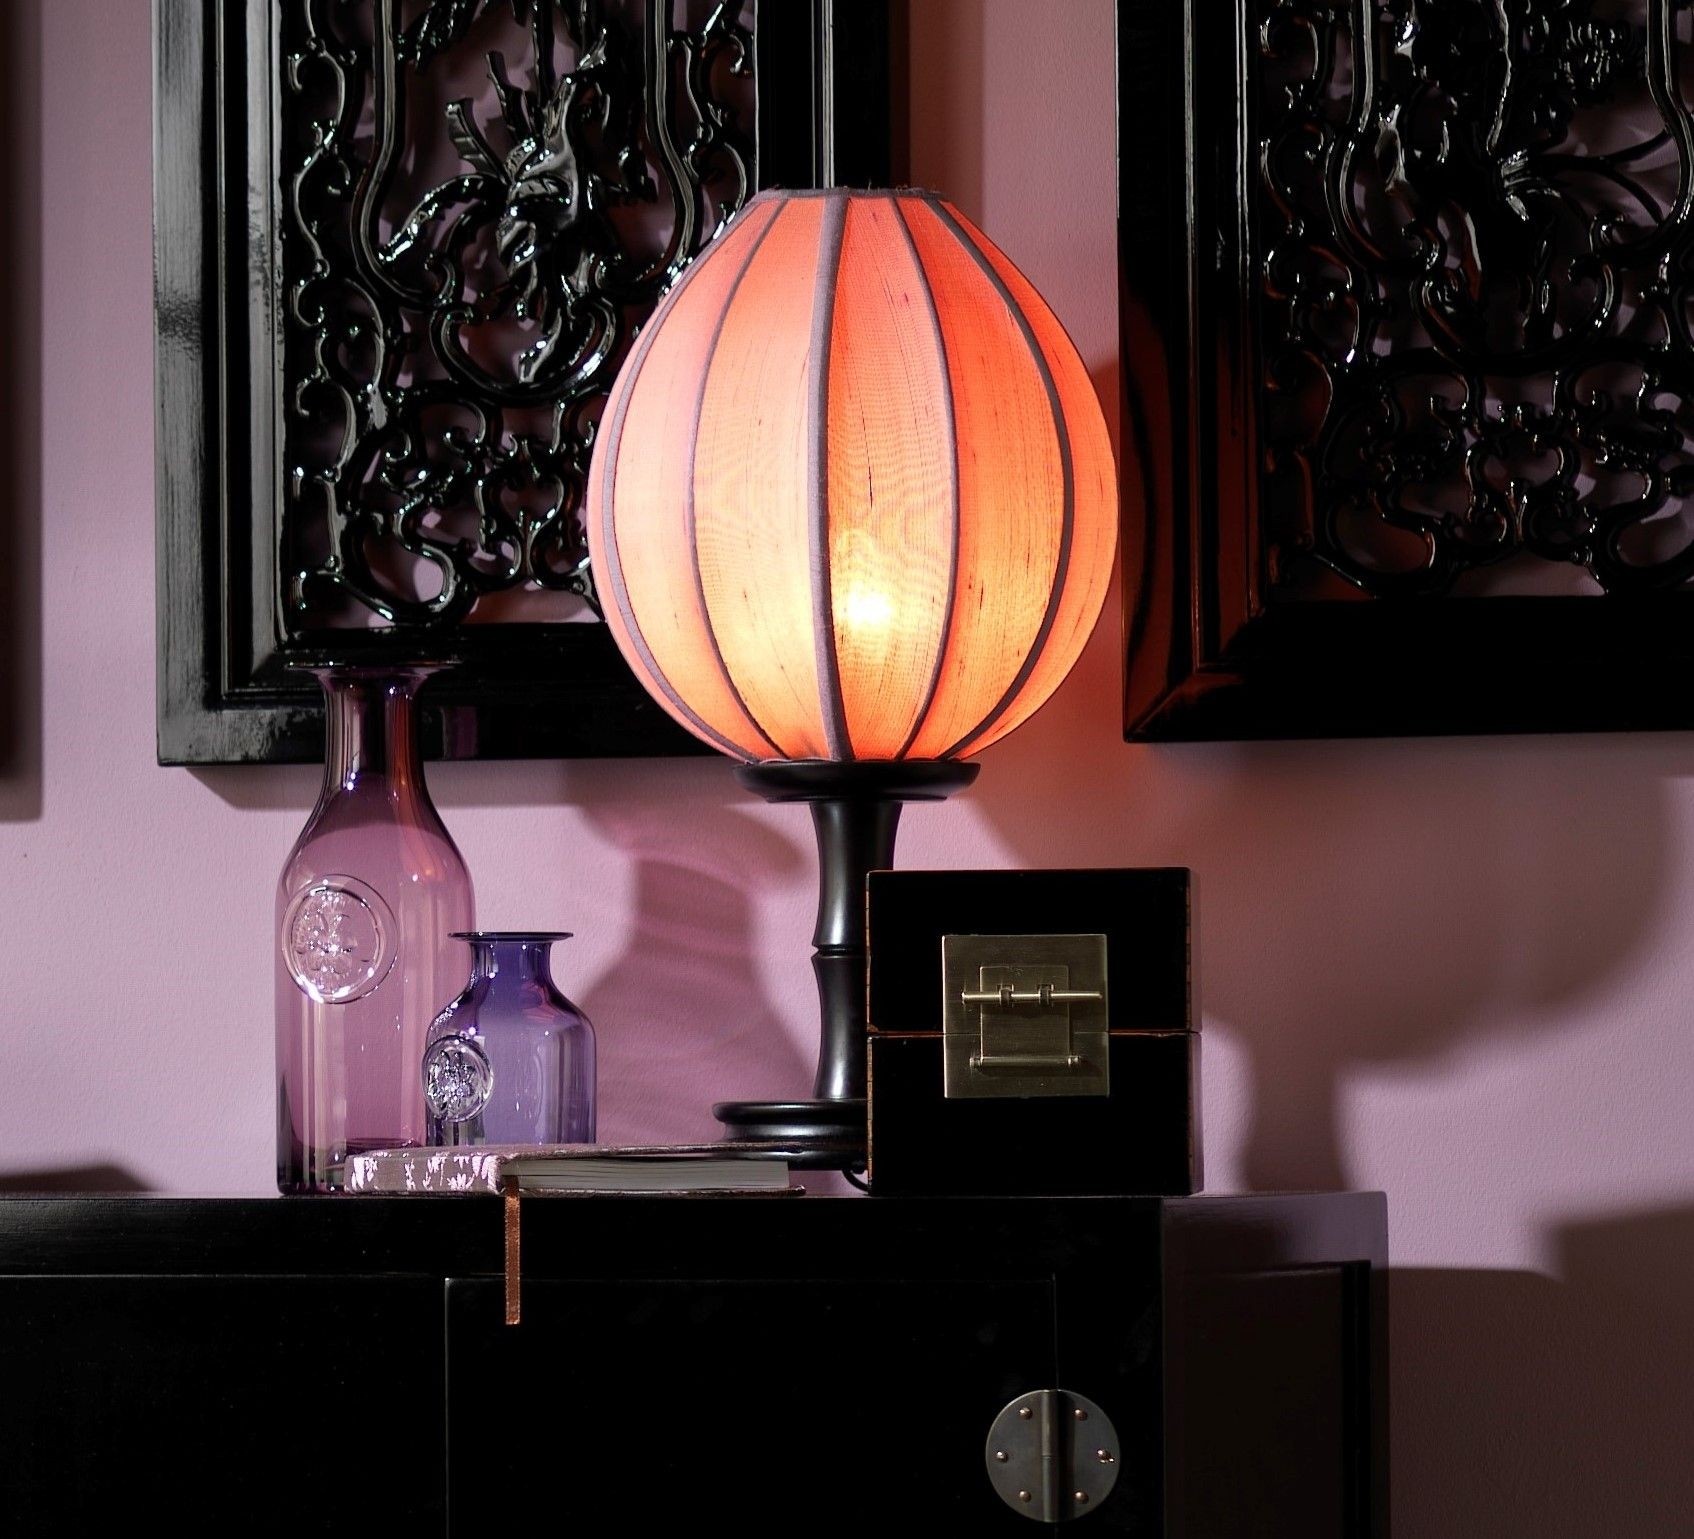 Lotus lamp on stand in 2020 lotus lamp chinese lamps